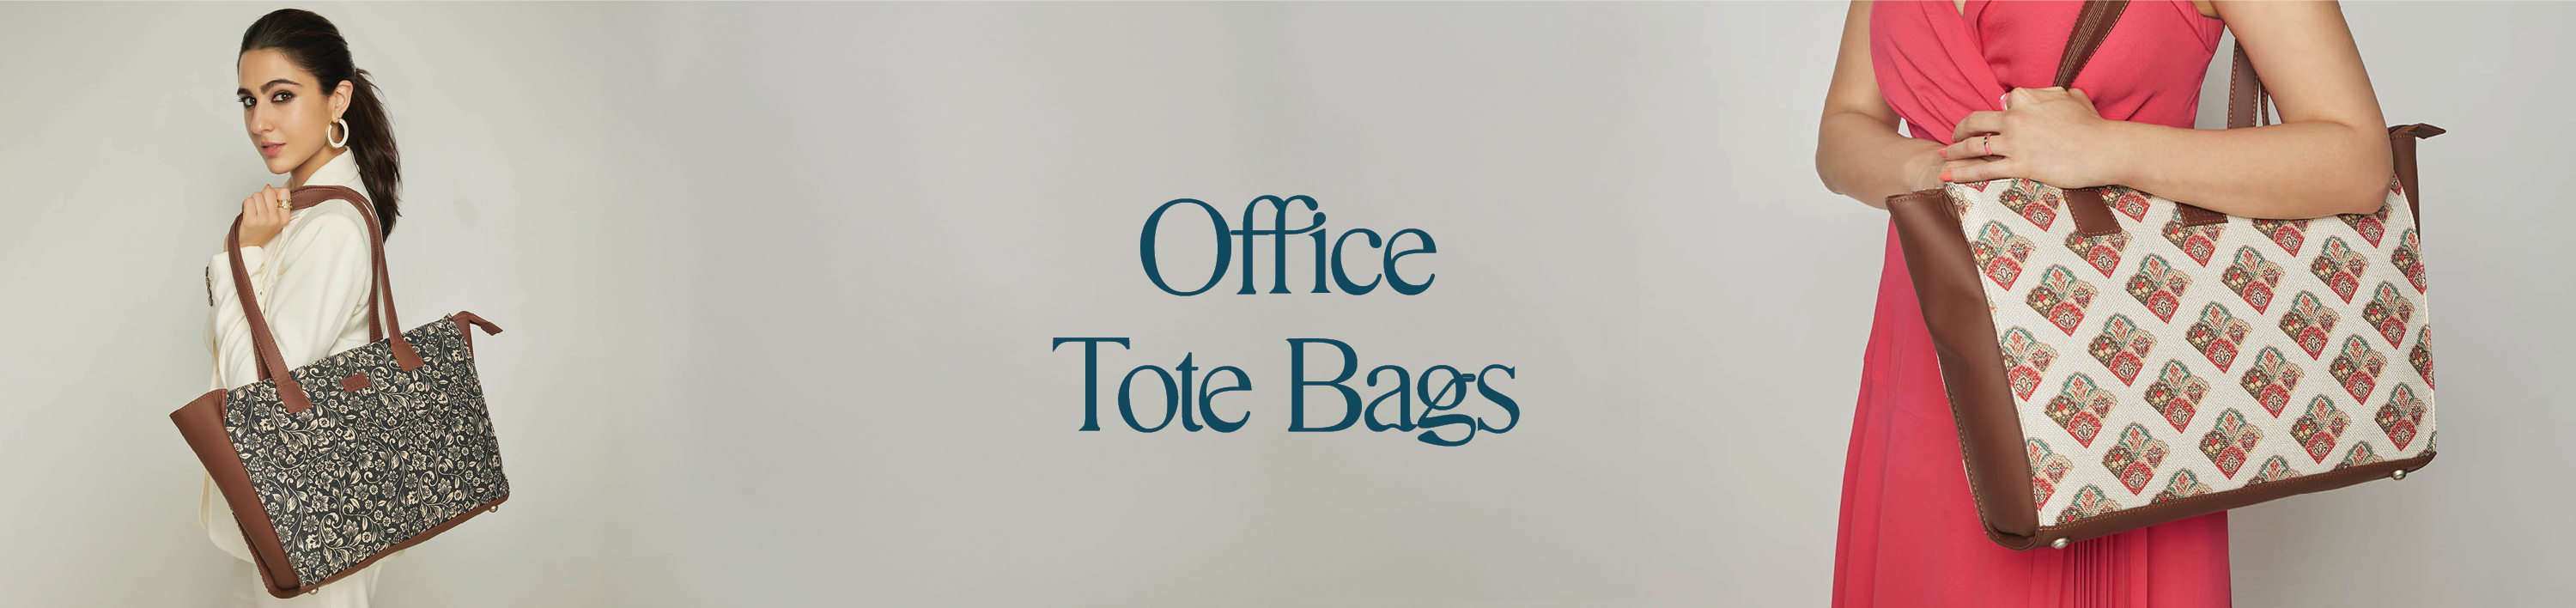 Office Tote Bags